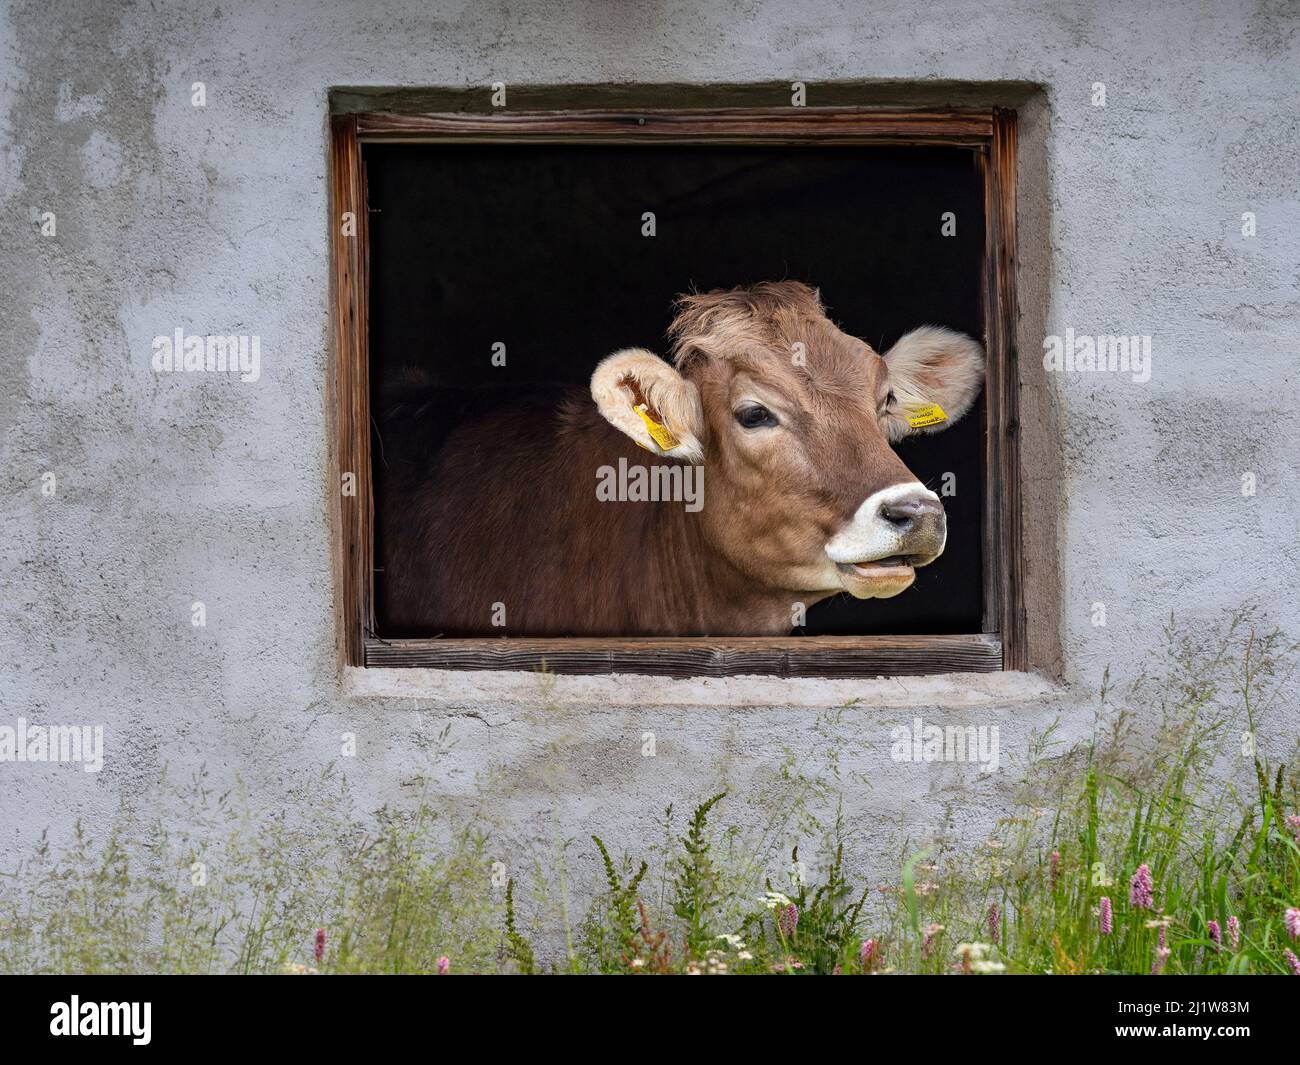 Dairy cow looking out of shed window, Seiser Alm, Dolomites plateau, South Tyrol, Italy, July. Stock Photo